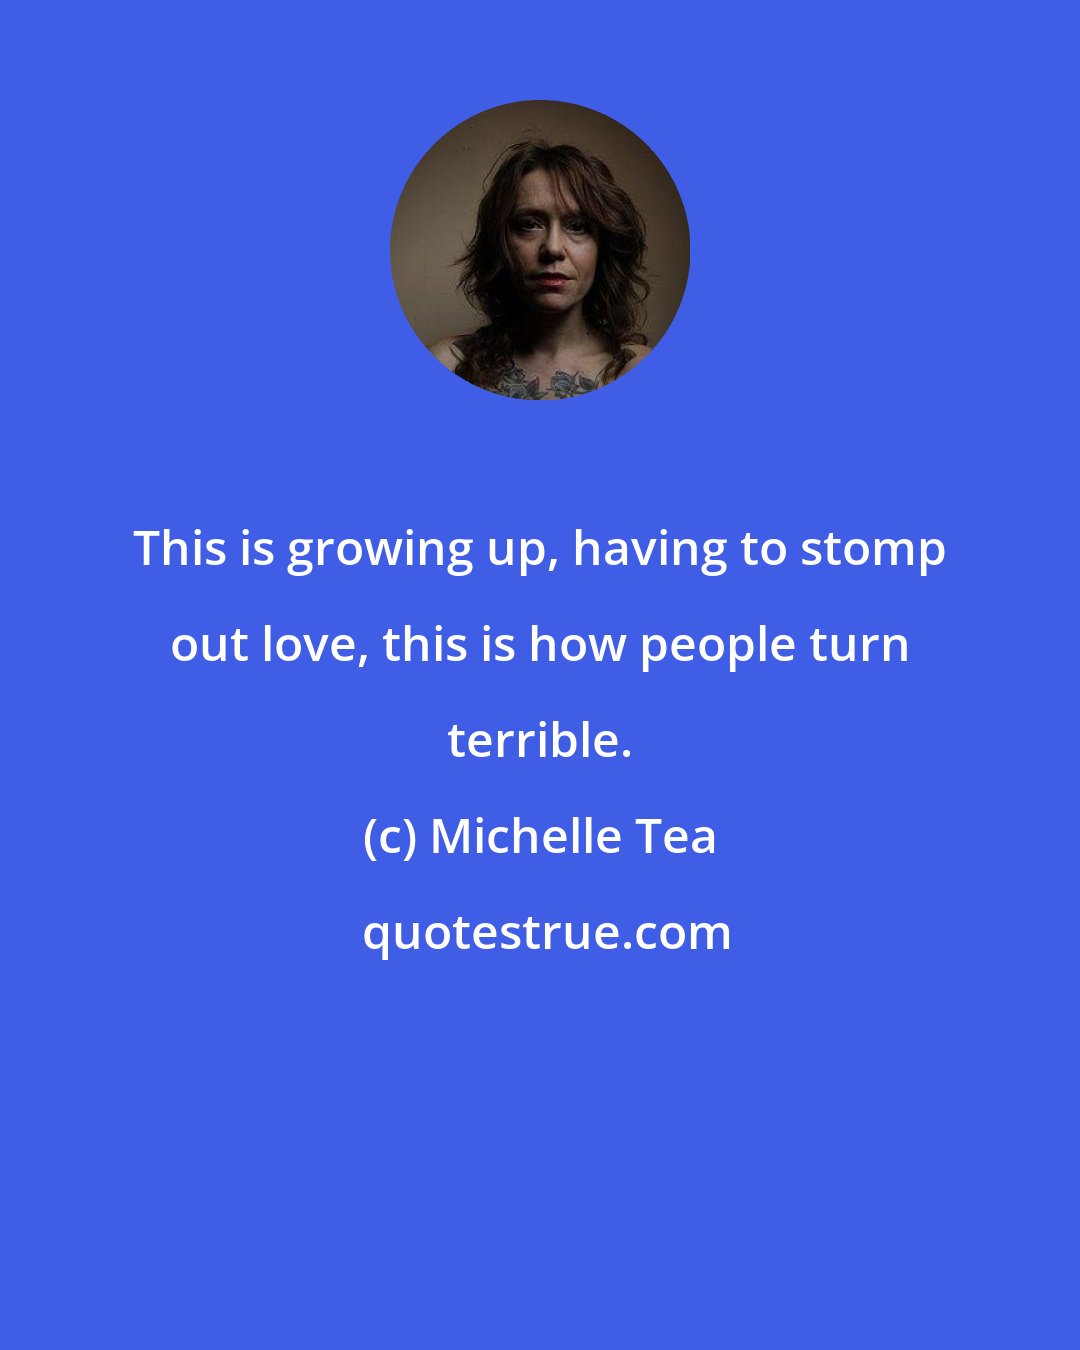 Michelle Tea: This is growing up, having to stomp out love, this is how people turn terrible.